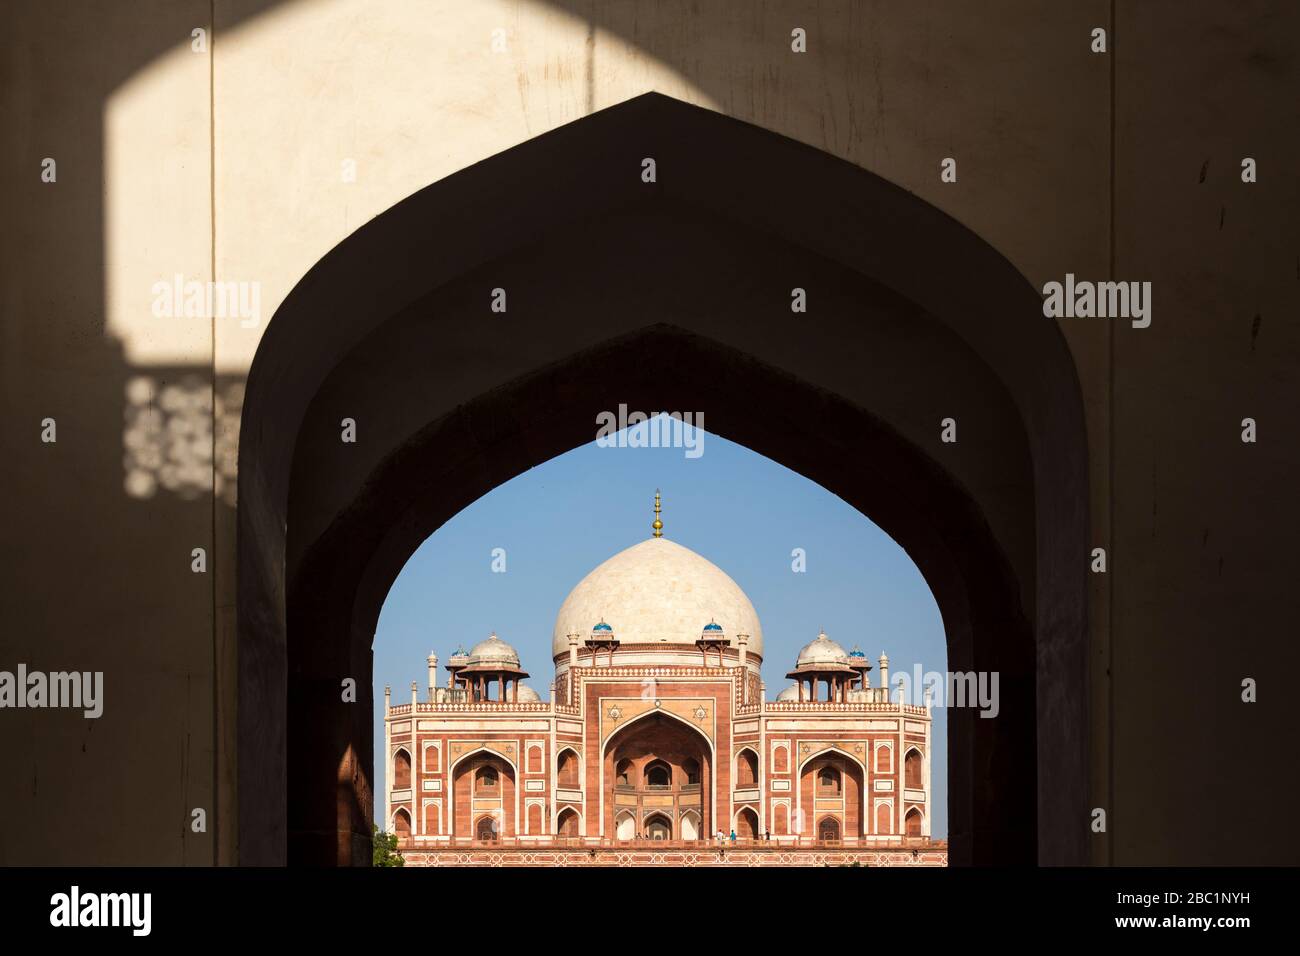 Humayun’s Tomb framed by an entrance arch in New Delhi, India Stock Photo